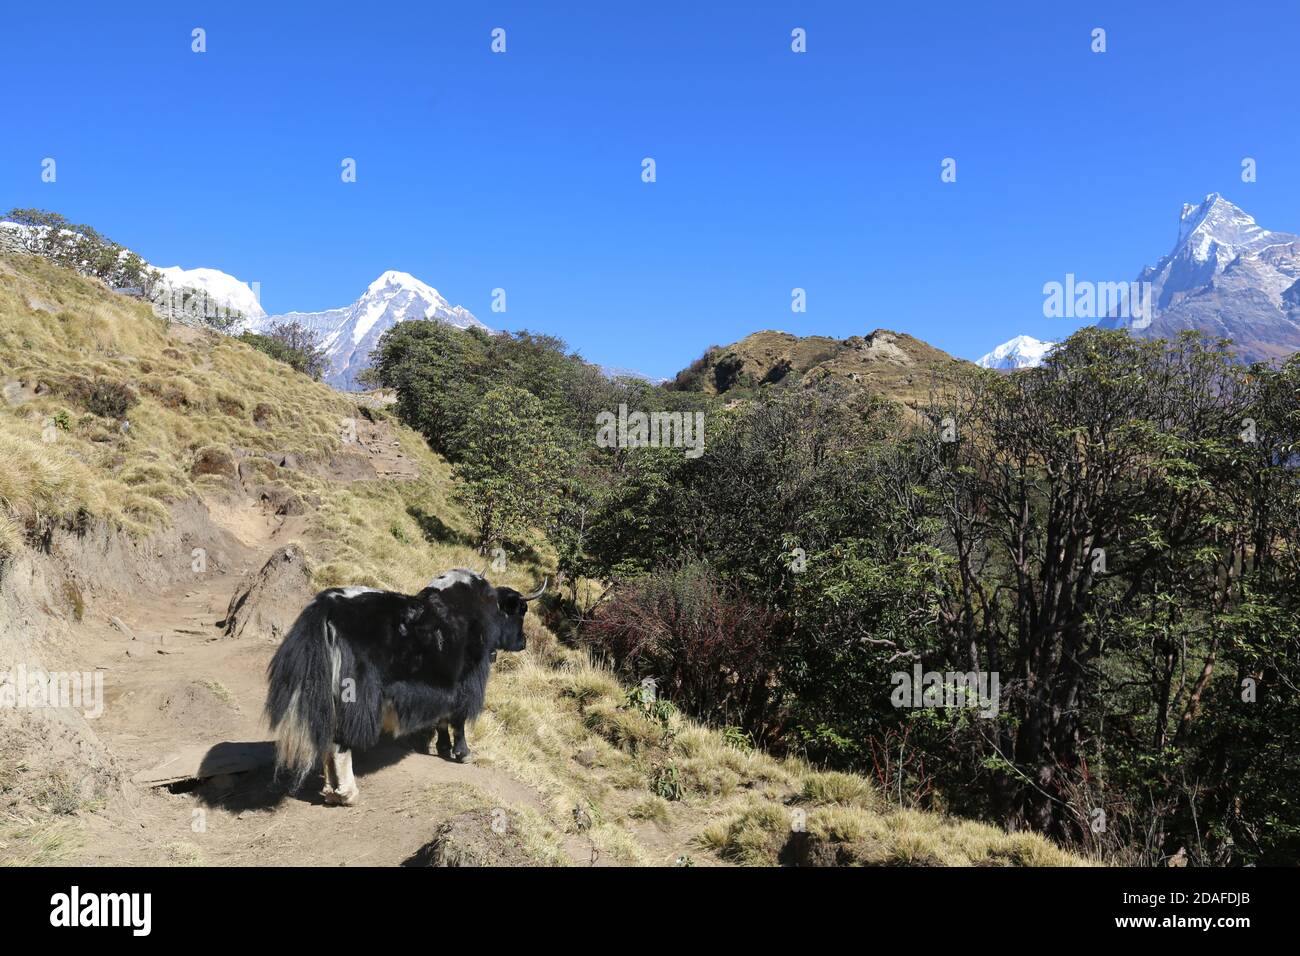 (201112) -- POKHARA, Nov. 12, 2020 (Xinhua) -- A yak is seen at the foot of the Annapurna ranges in Nepal on Nov. 10, 2020. (Photo by Tang Wei/Xinhua) Stock Photo